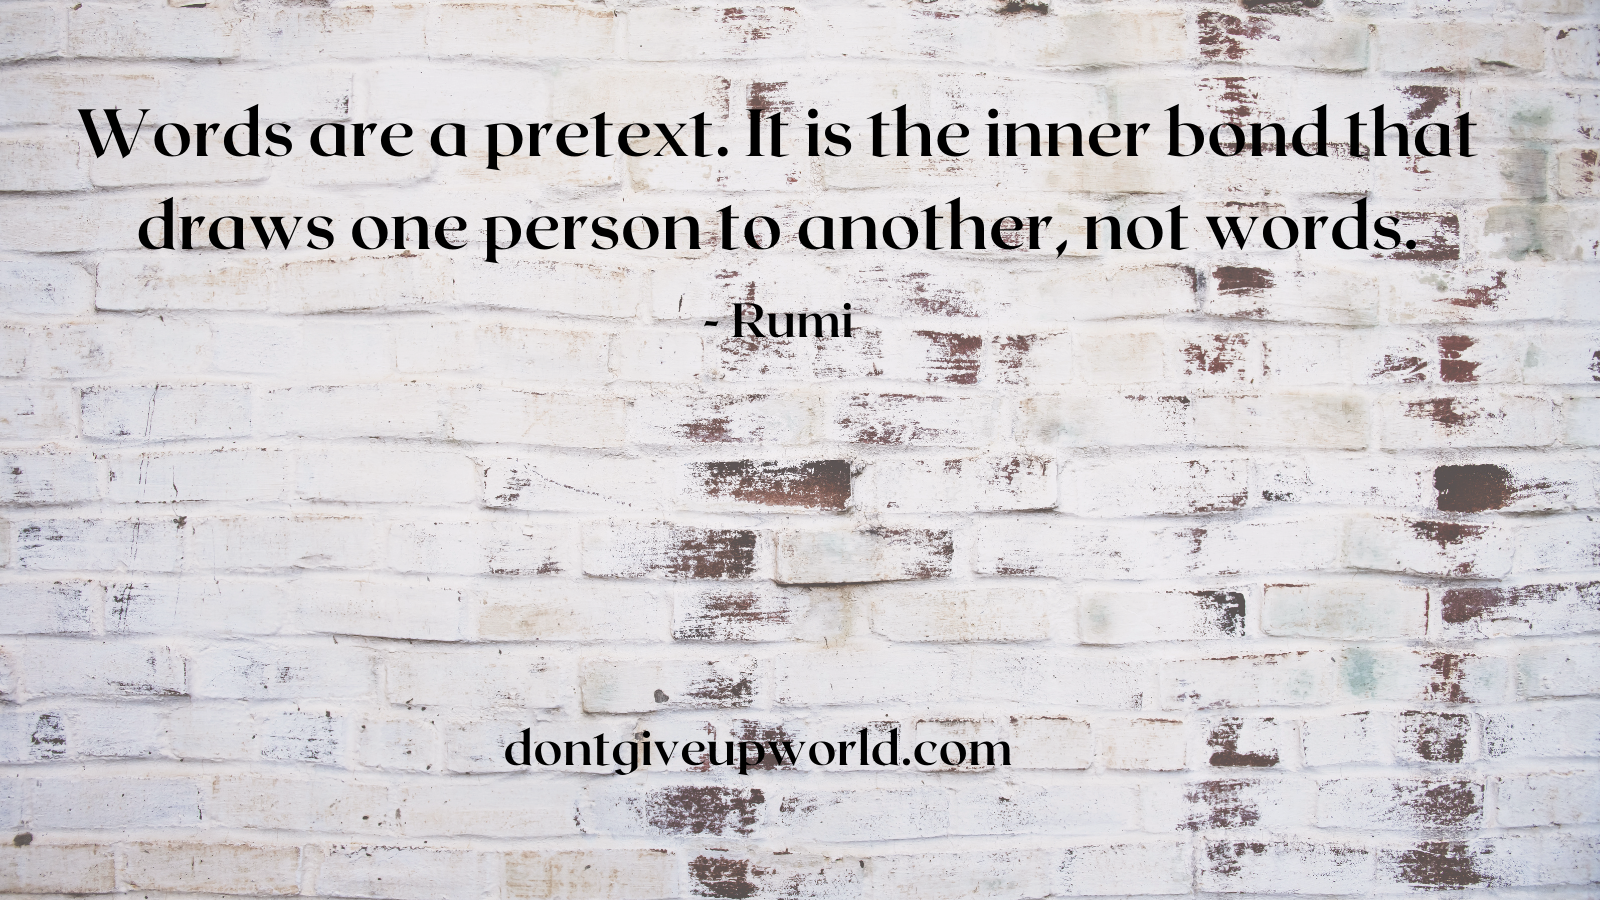 Quote on words are a pretext by Rumi